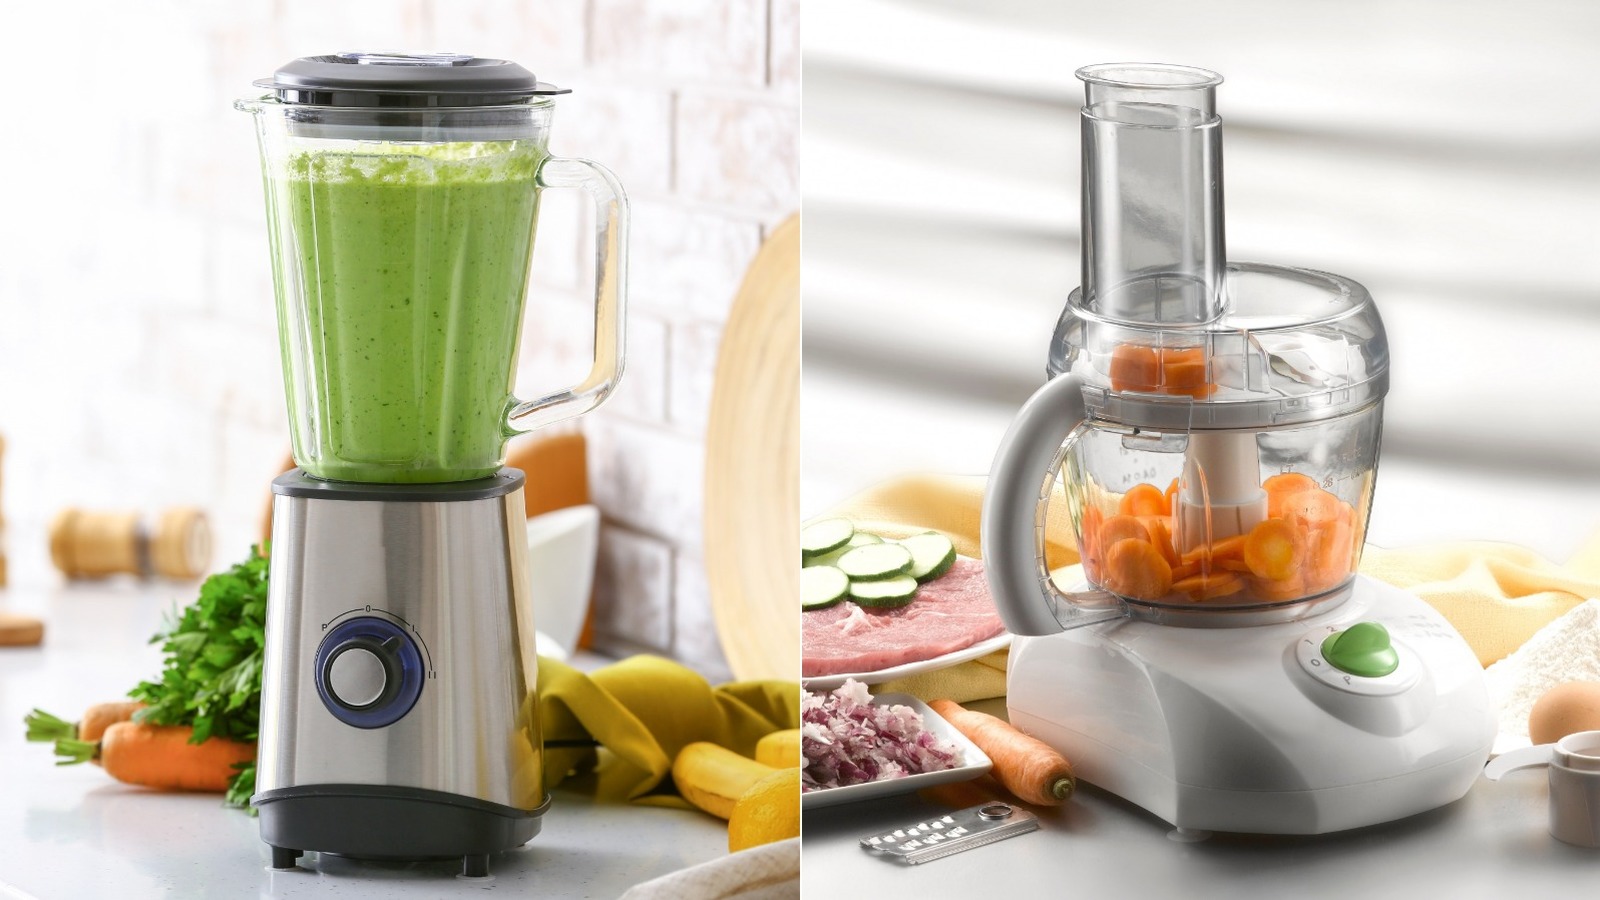 Blender Versus Food Processor: When to Use Each